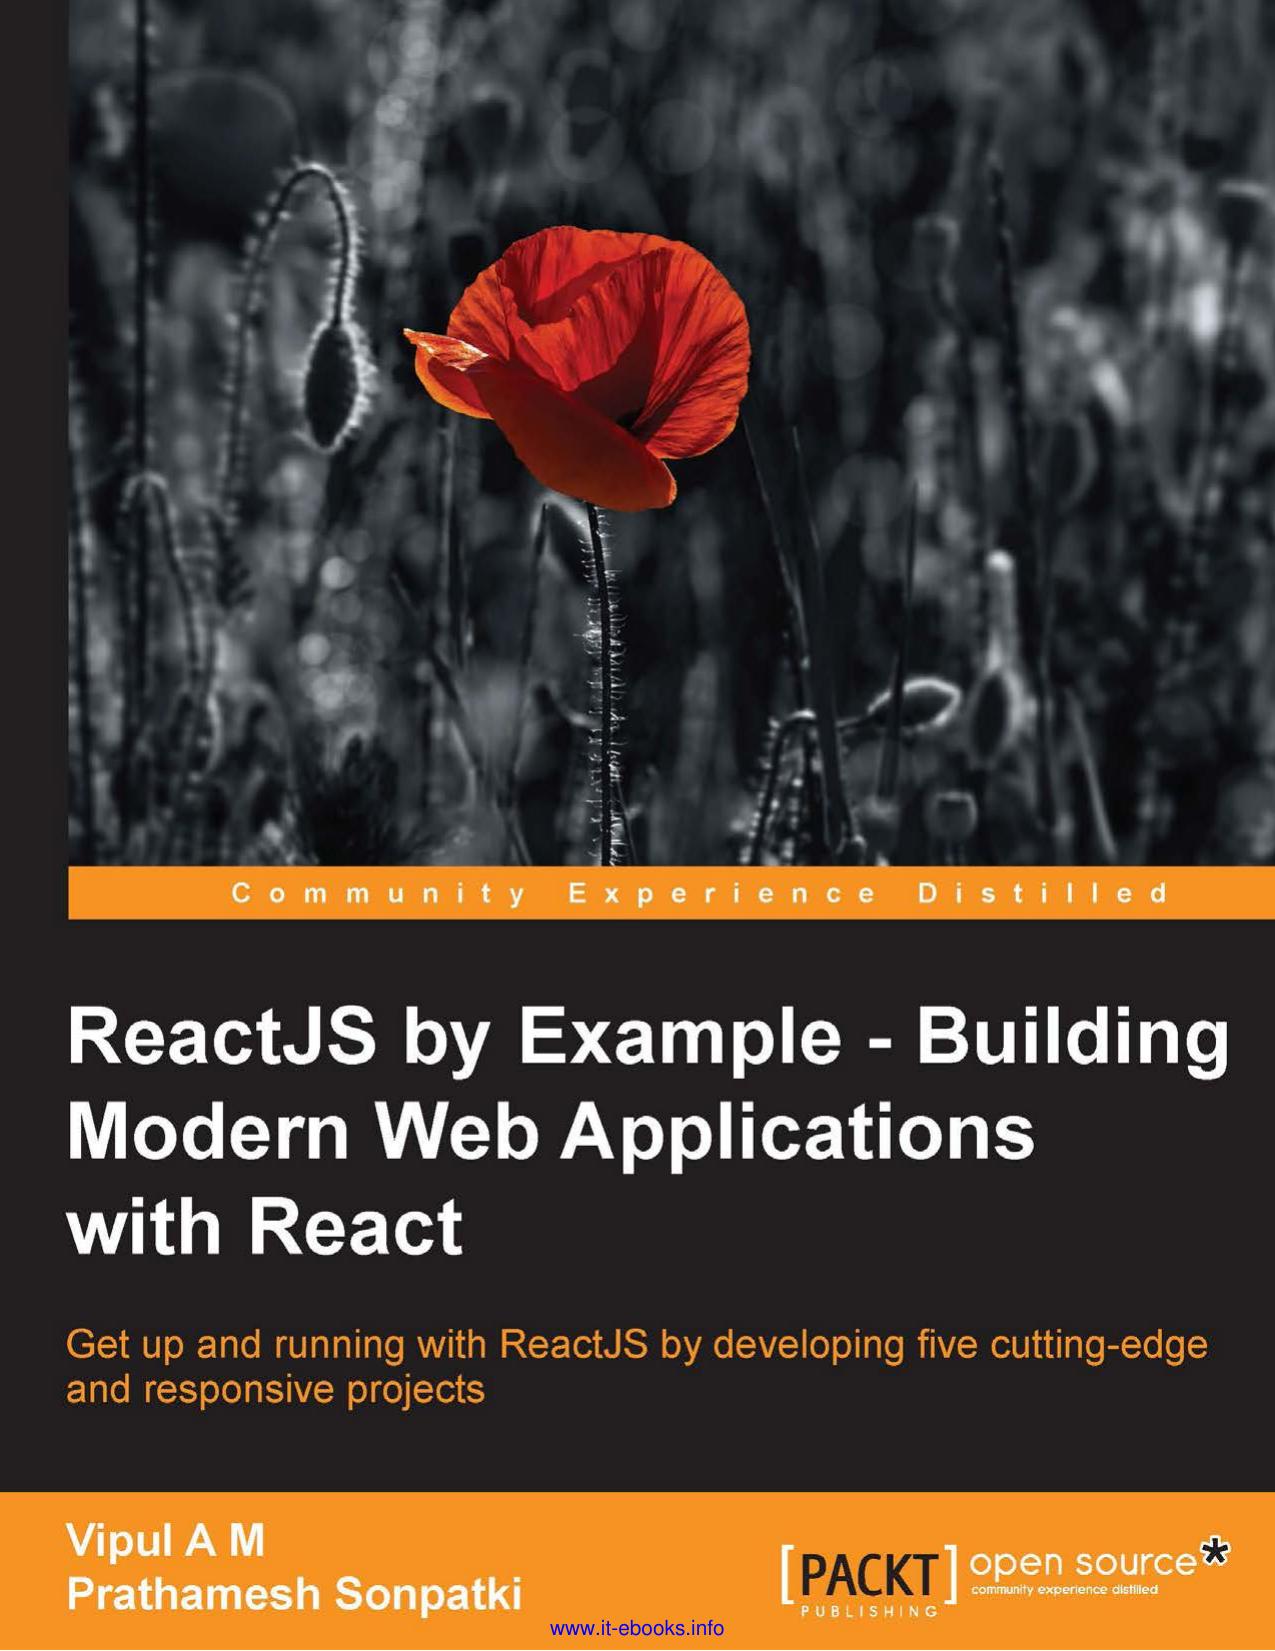 ReactJS by Example Building Modern Web Applications with React Get up and running with ReactJS by developing five cutting-edge and responsive projects by Vipul A M, Prathamesh Sonpatki